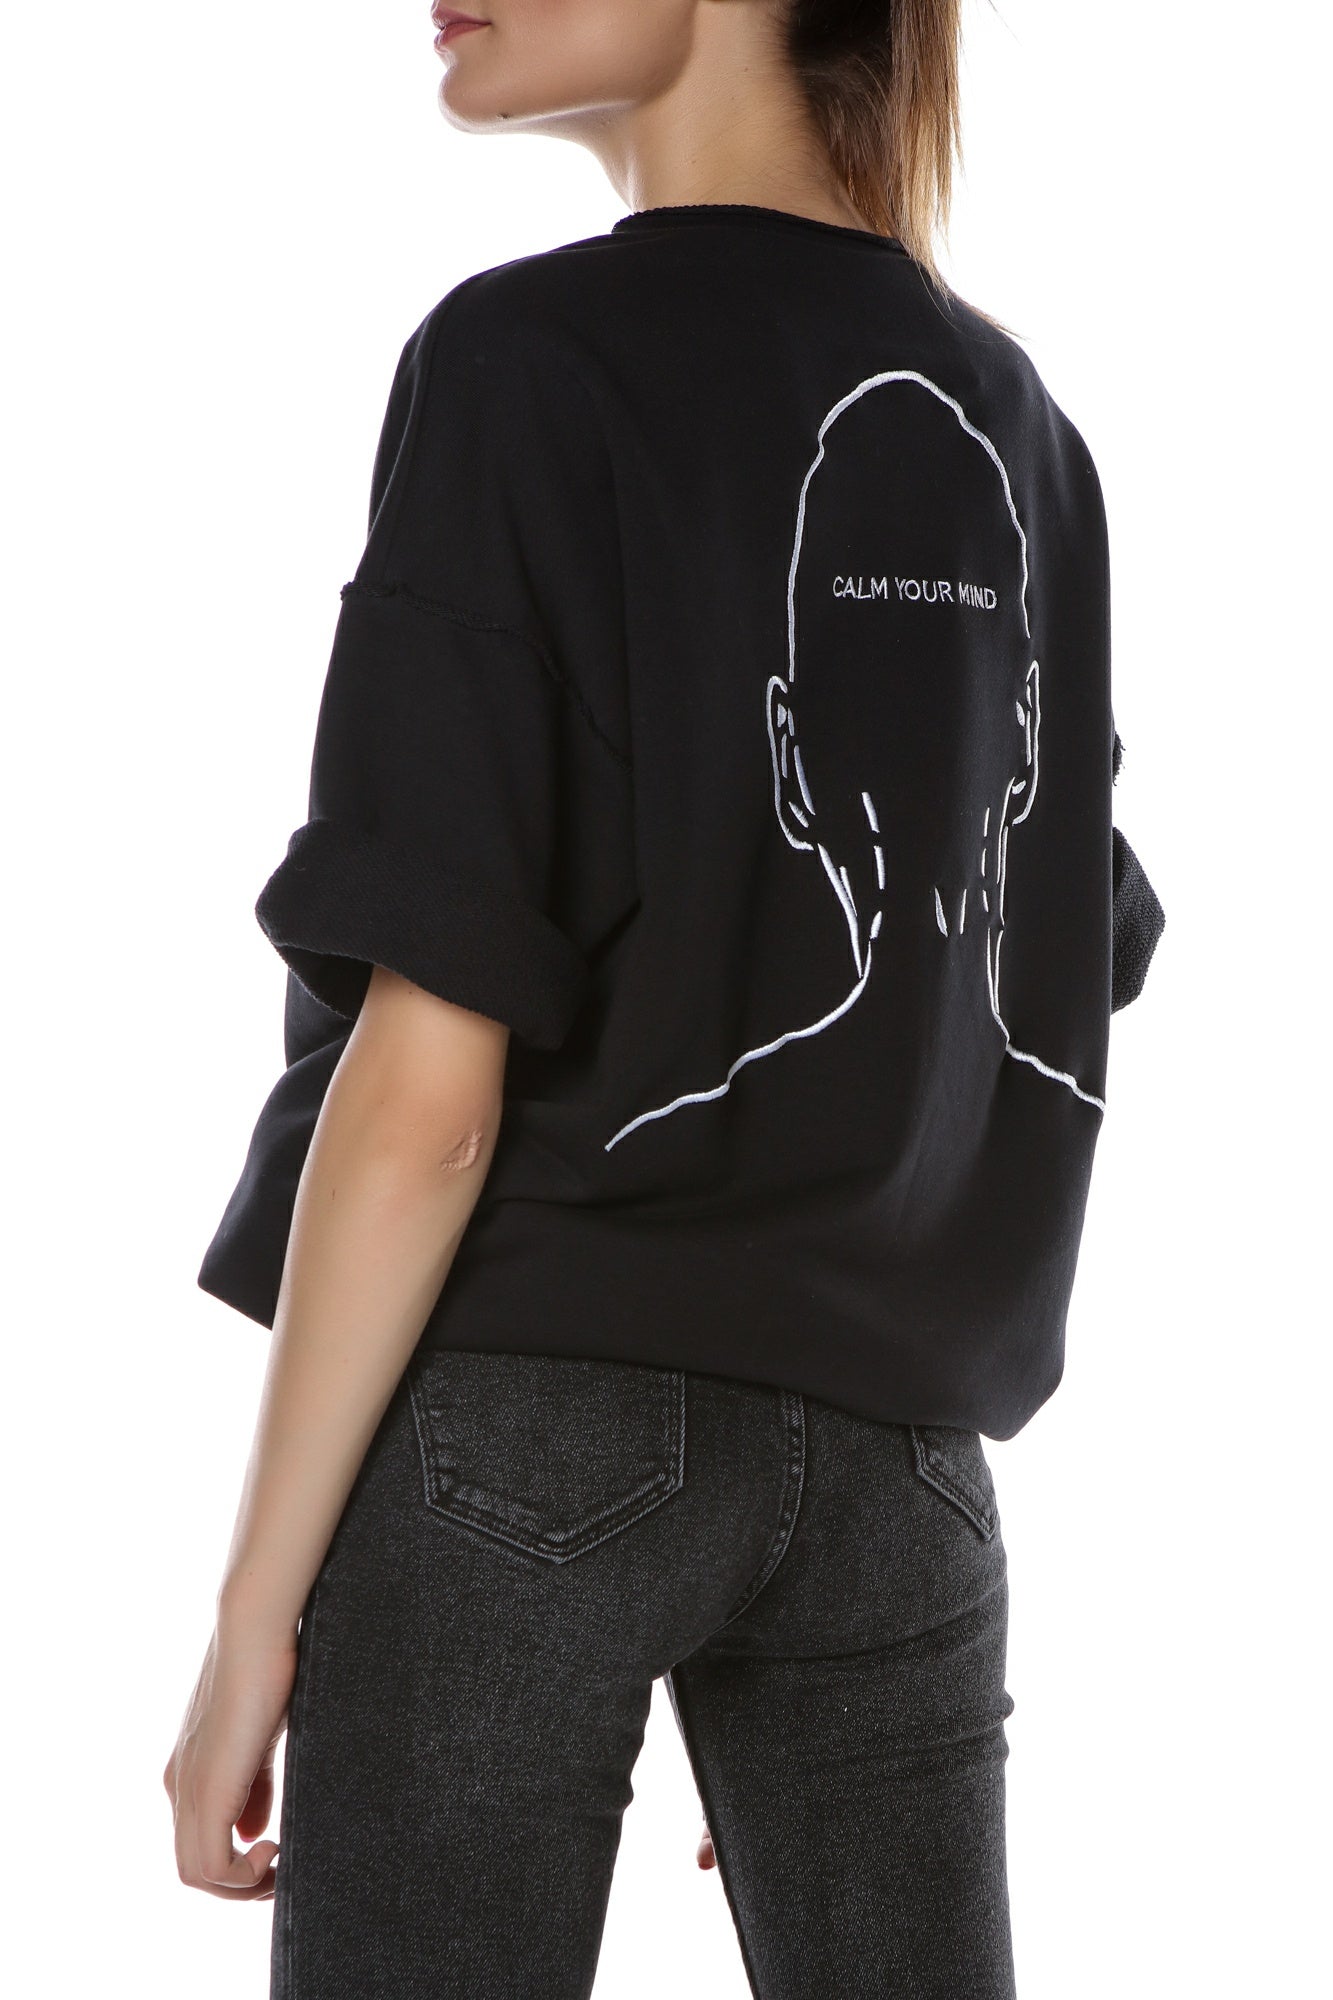 CALM embroidered W BLACK T-shirt